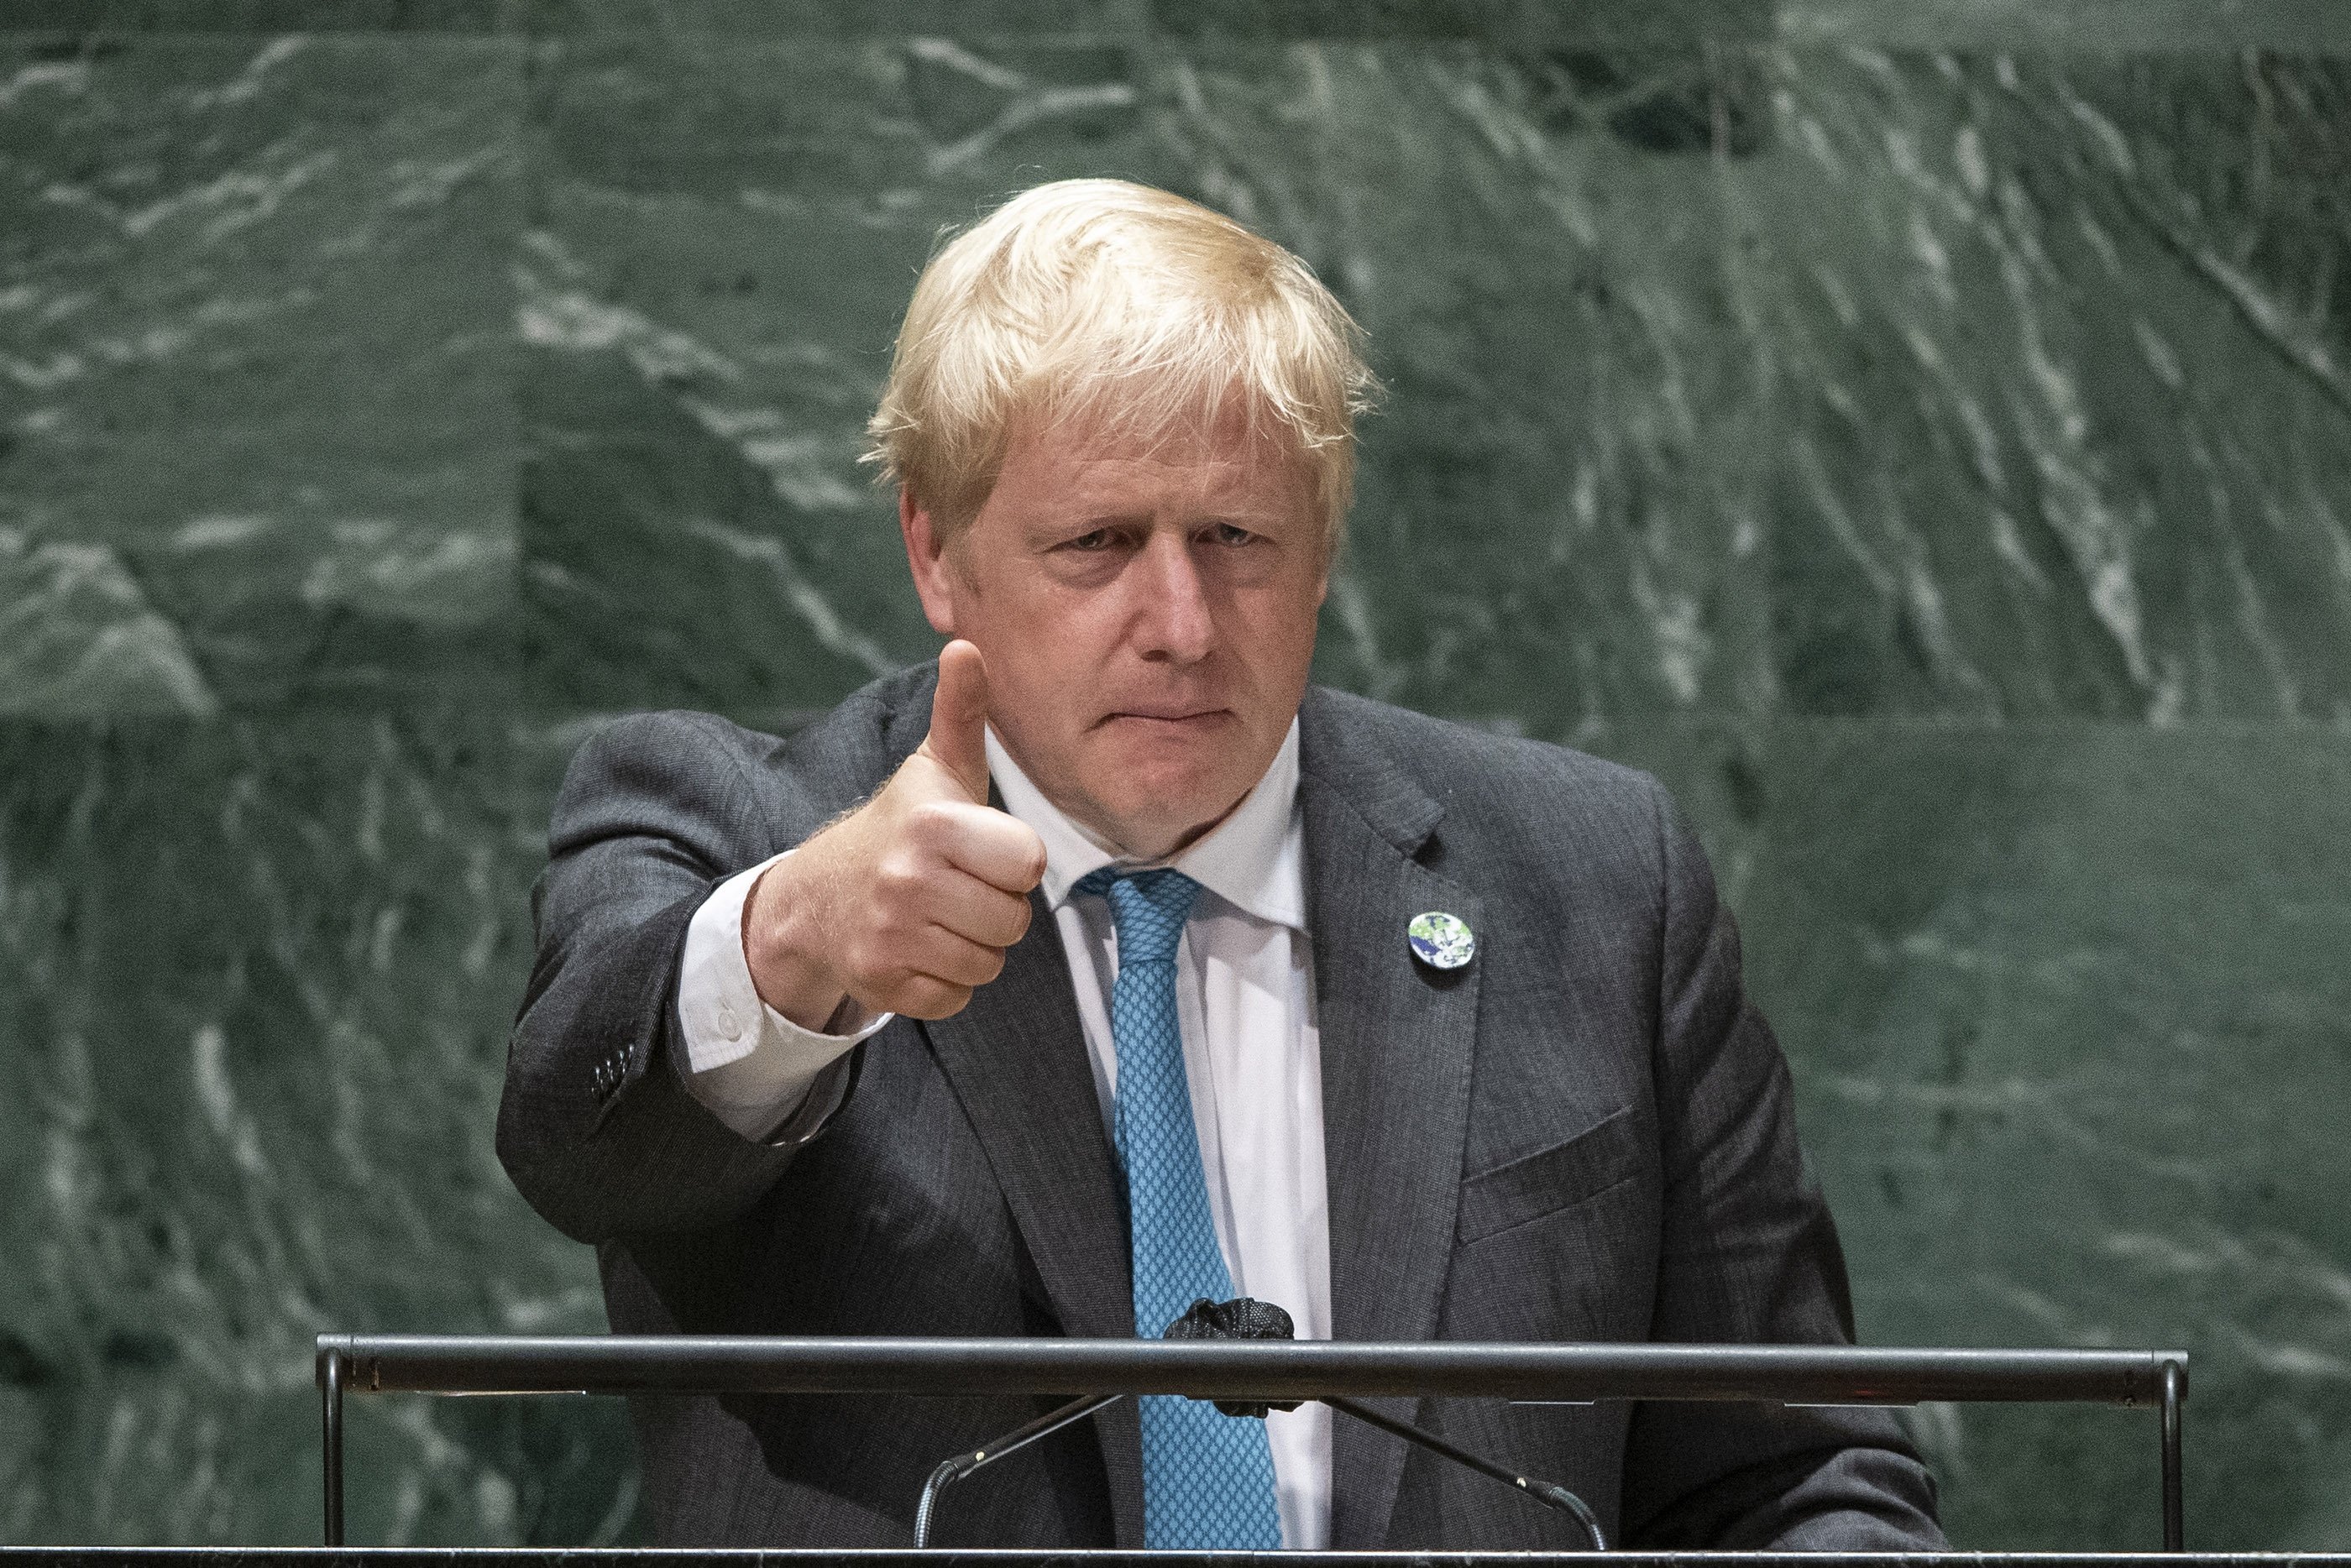 Johnson quotes puppet Kermit the Frog in UN climate address | Daily Sabah